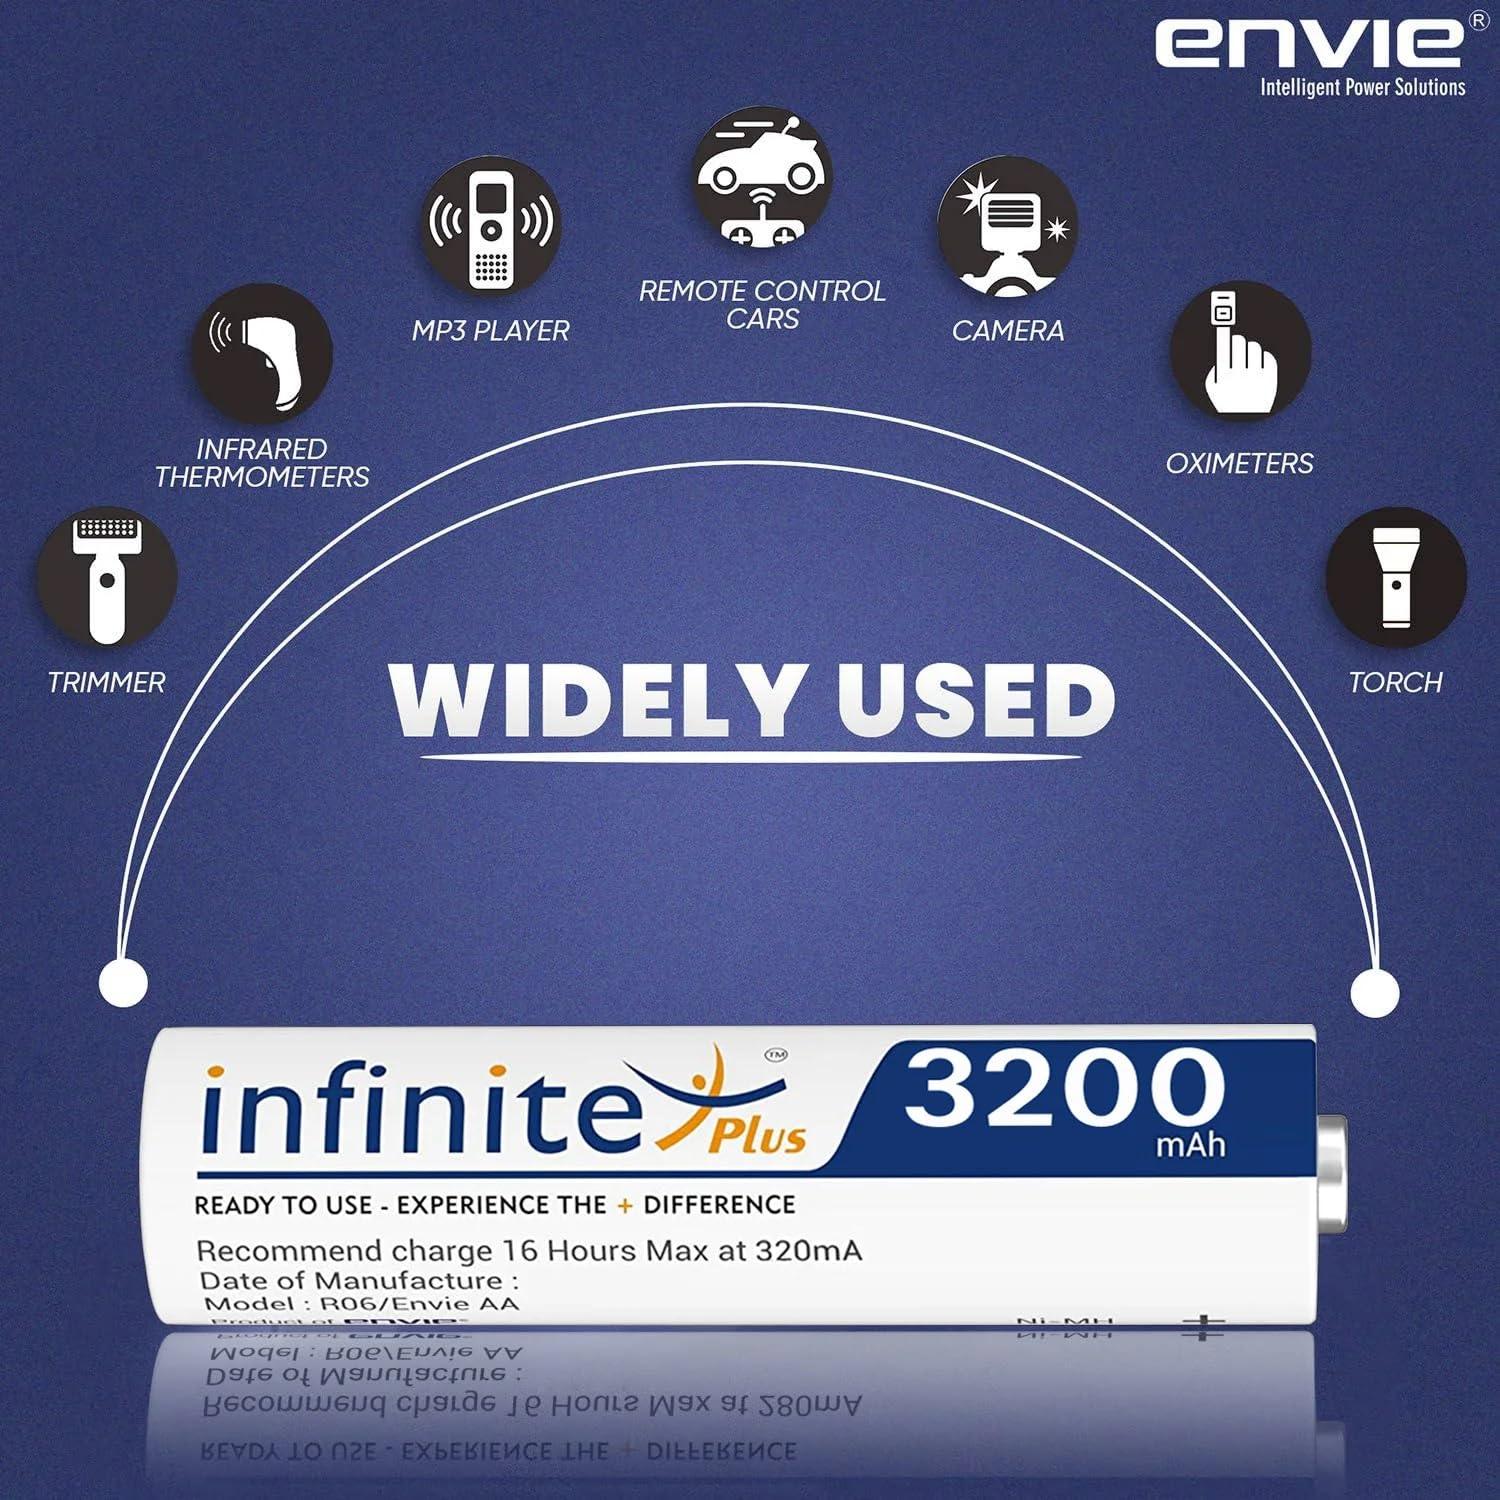 ENVIE (AA3200 2PL) Infinite Rechargeable Battery for Remote Controls, Electronic Toys, Cameras, Flashlights and Others - Digitek